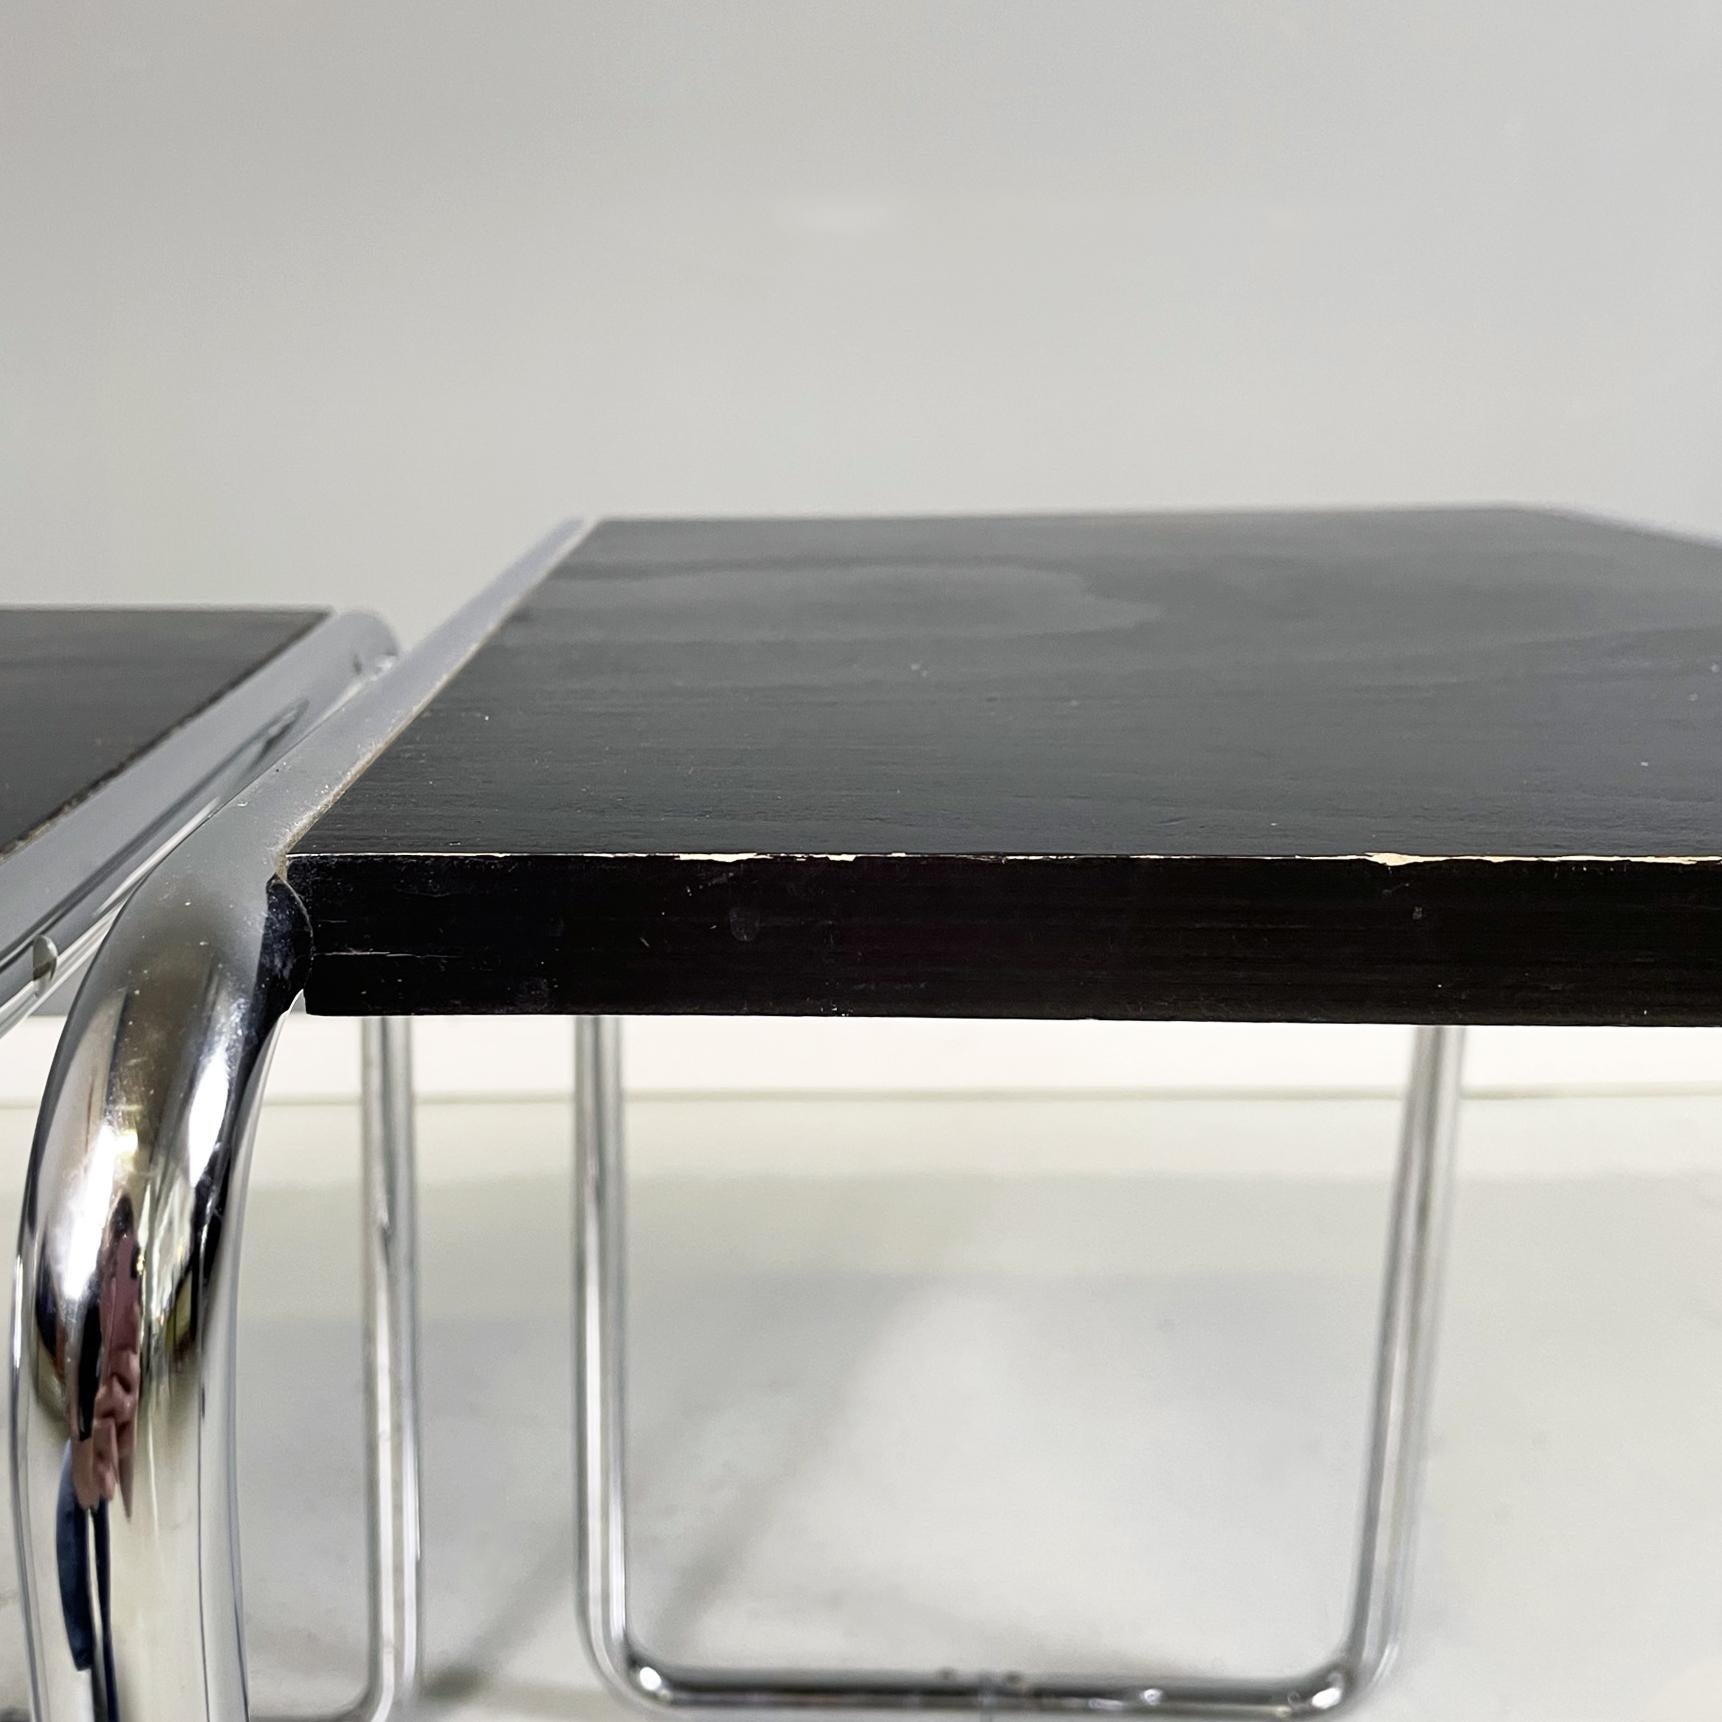 German Black Wood and Steel Coffee Tables by Arnold Bauhaus Collection, 1980s For Sale 3